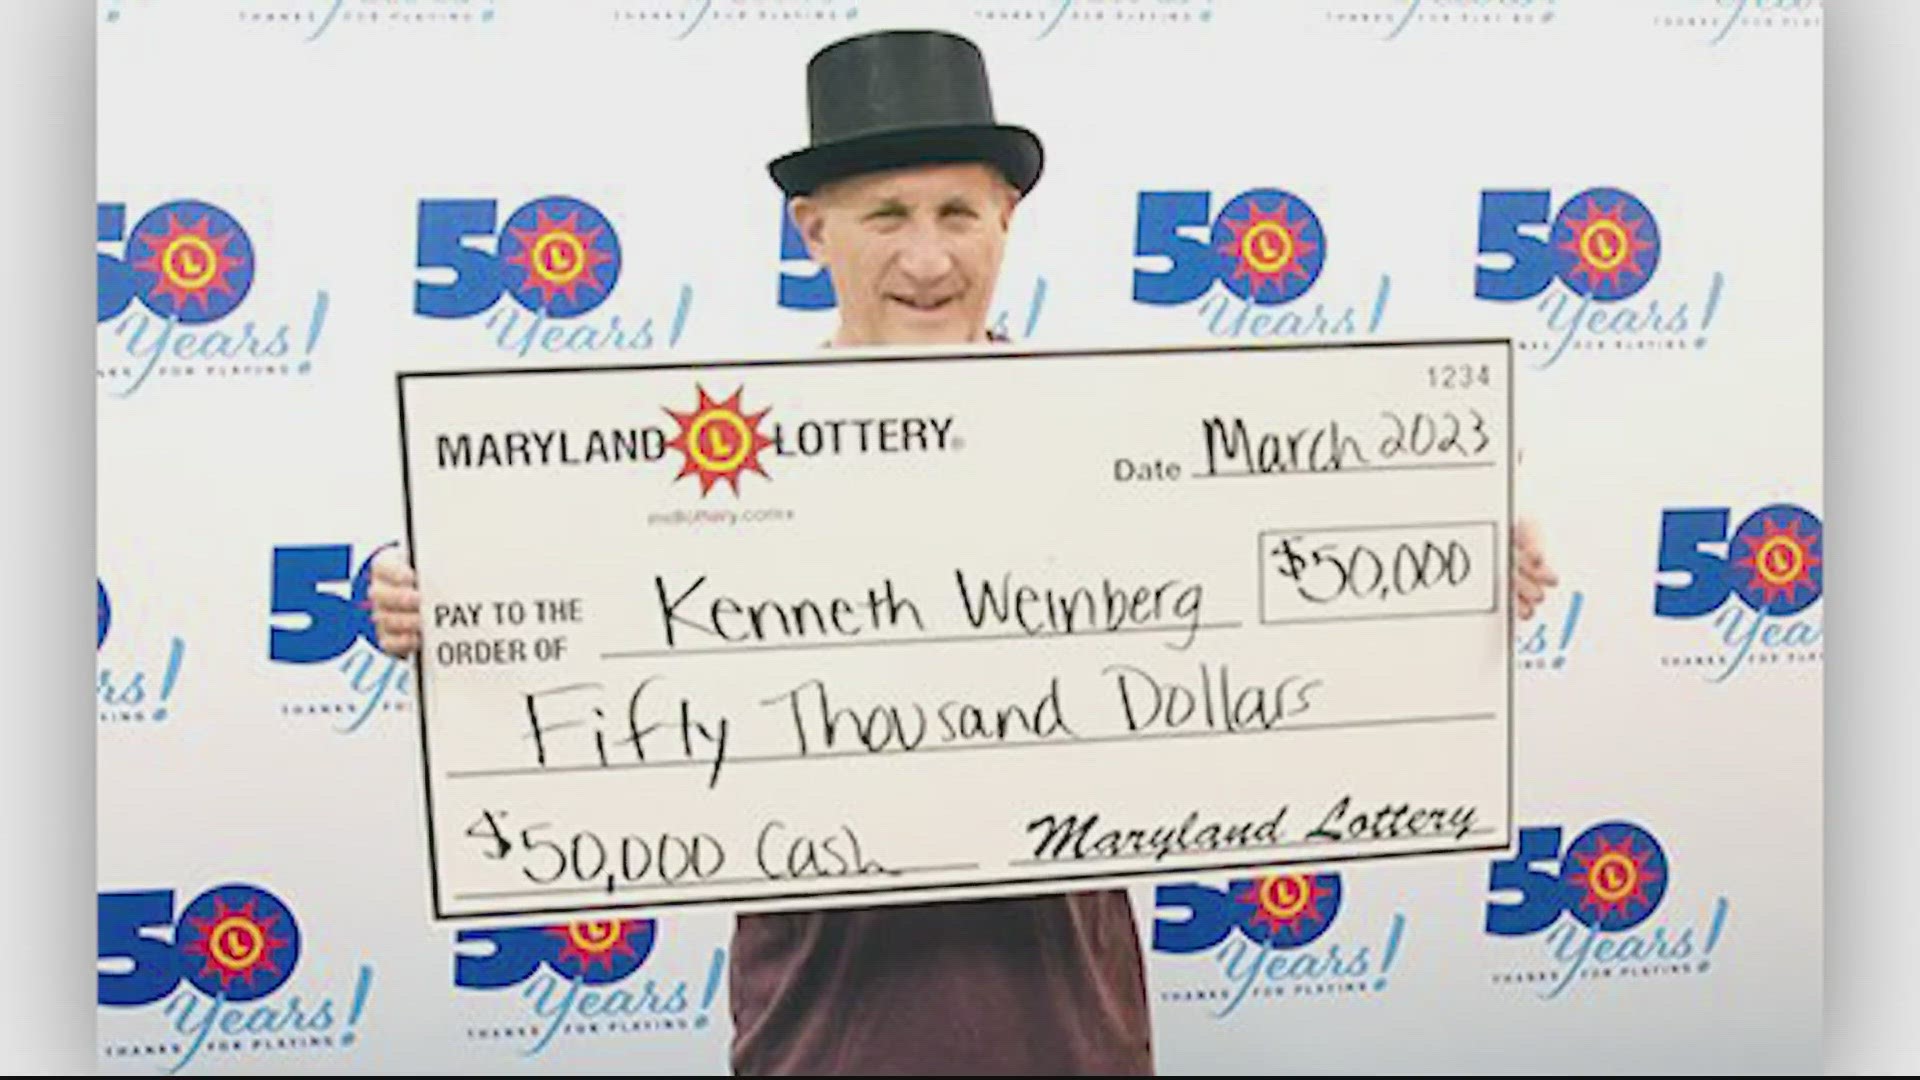 It's the fourth time he's won $50,000 or more playing the lottery.